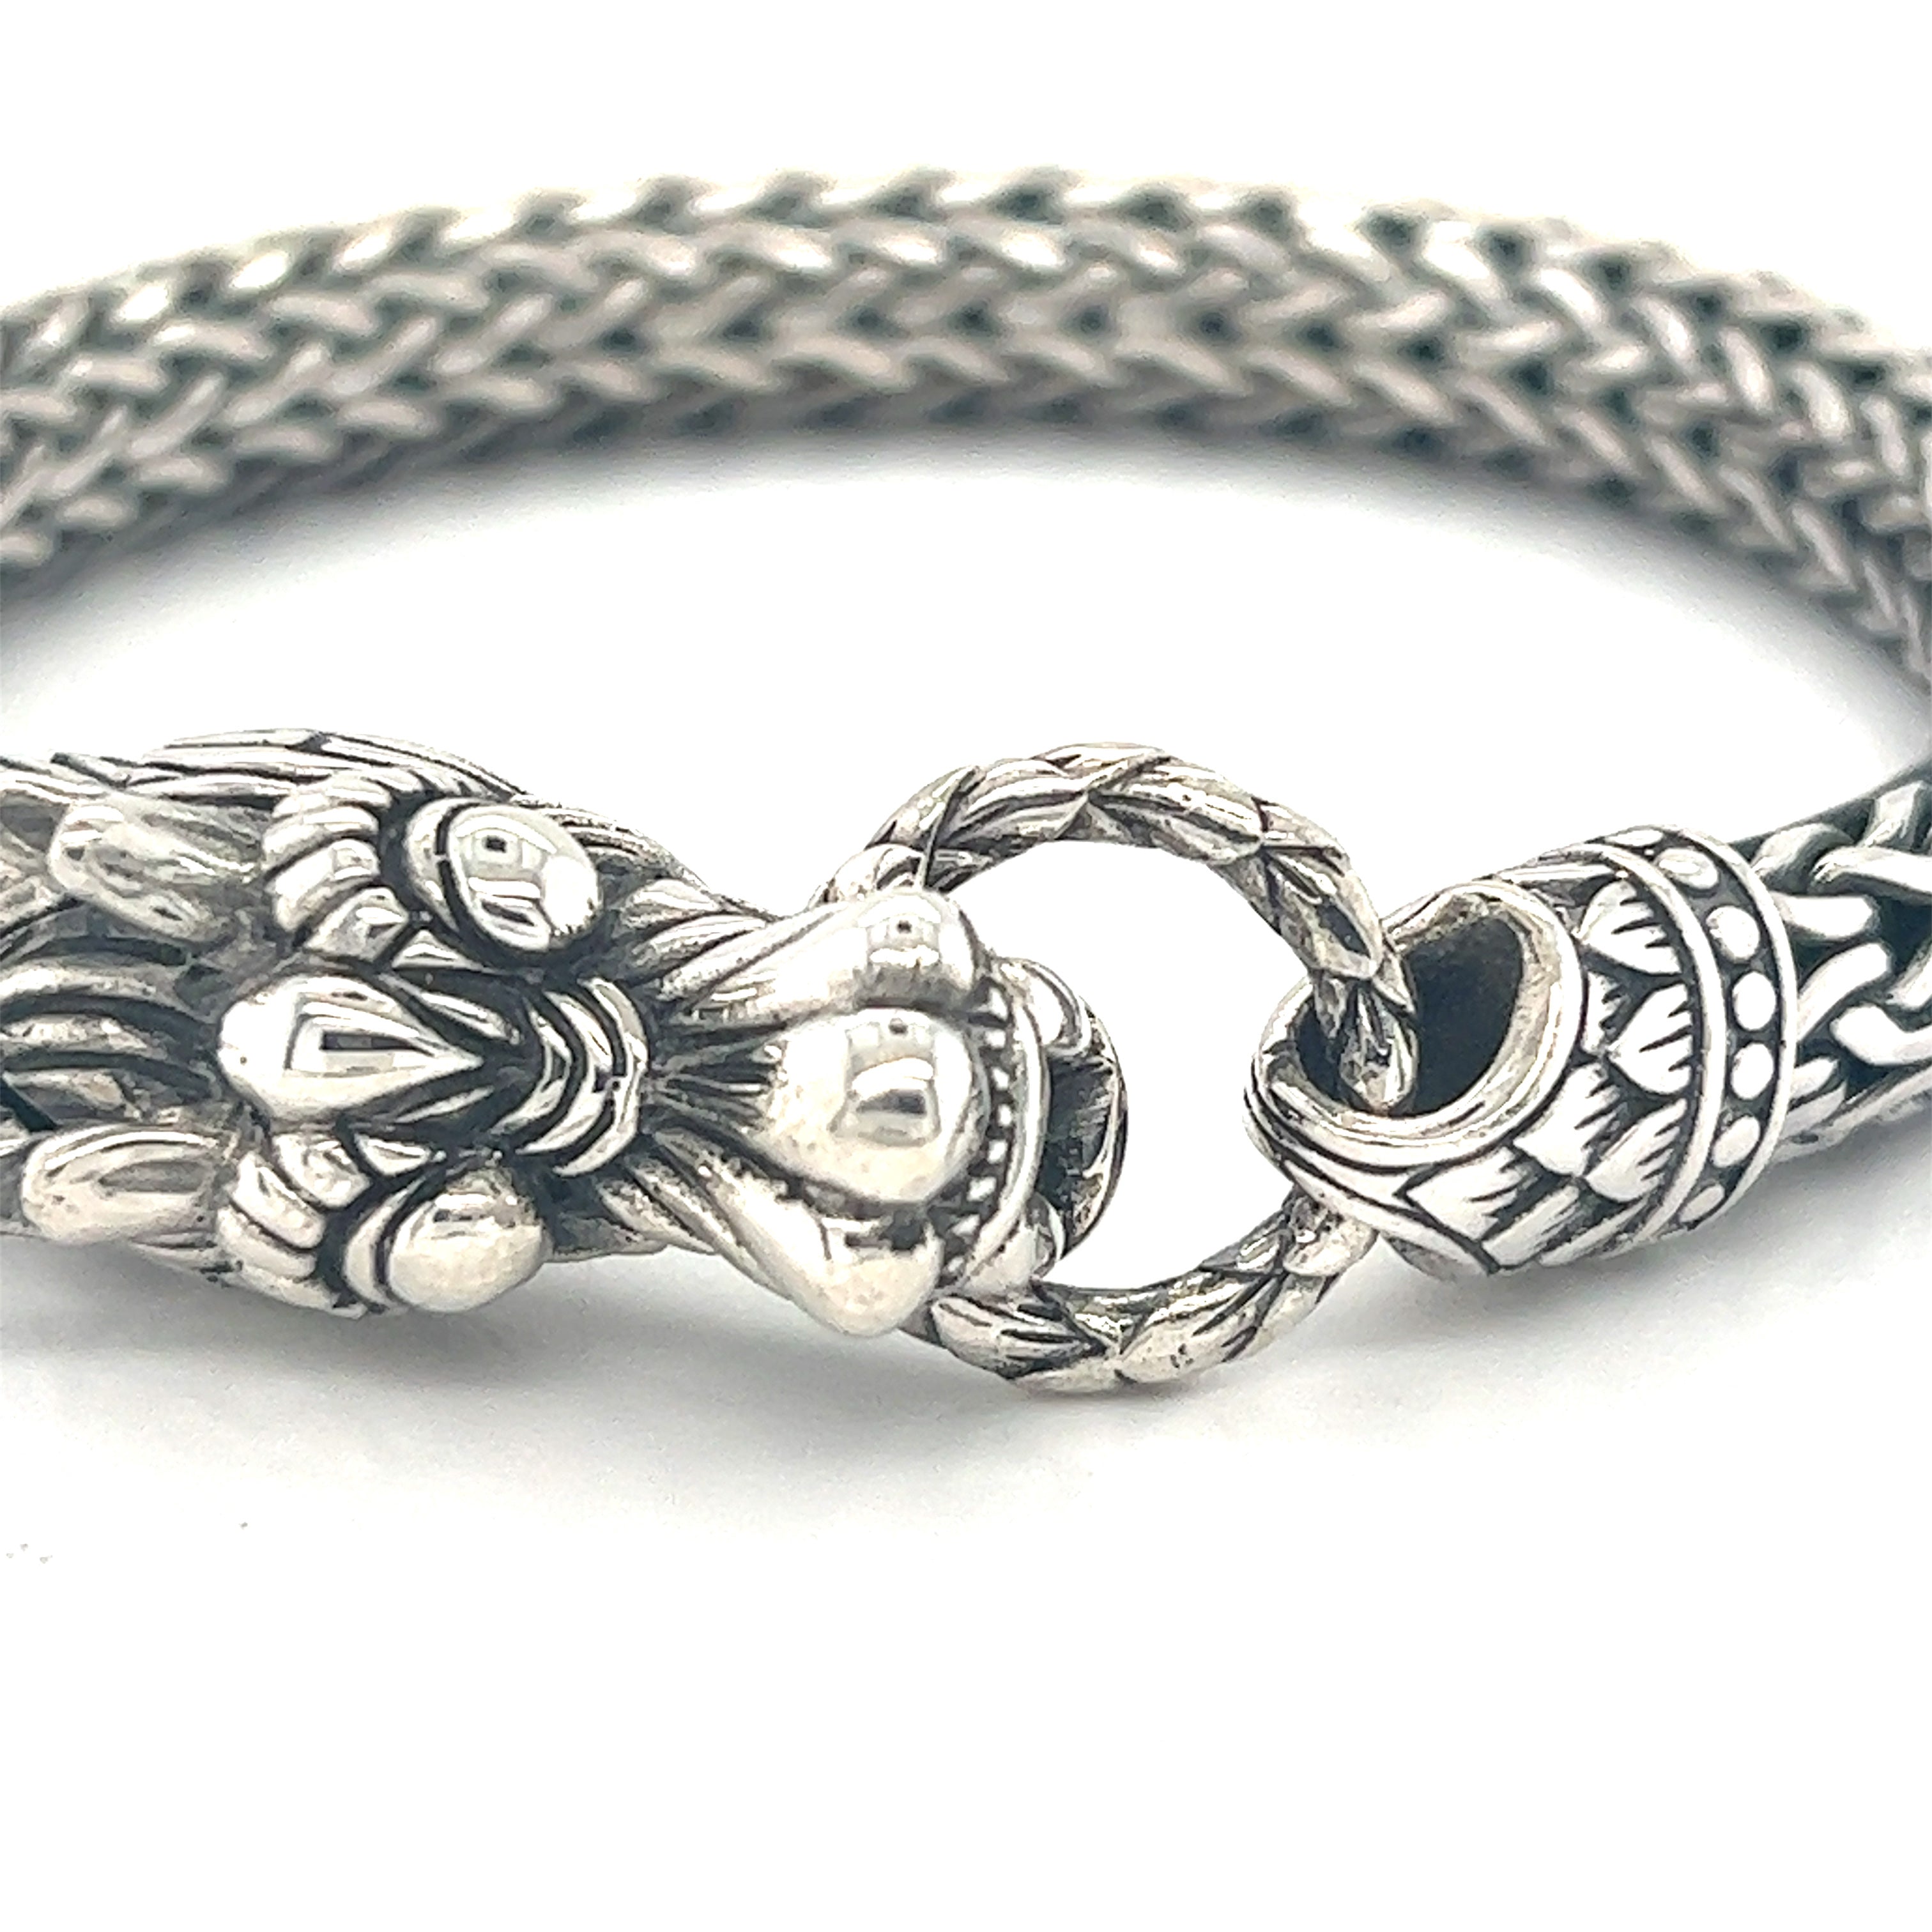 The Twin Dragon Silver Bracelet In Marcasite For Men - Silver Palace